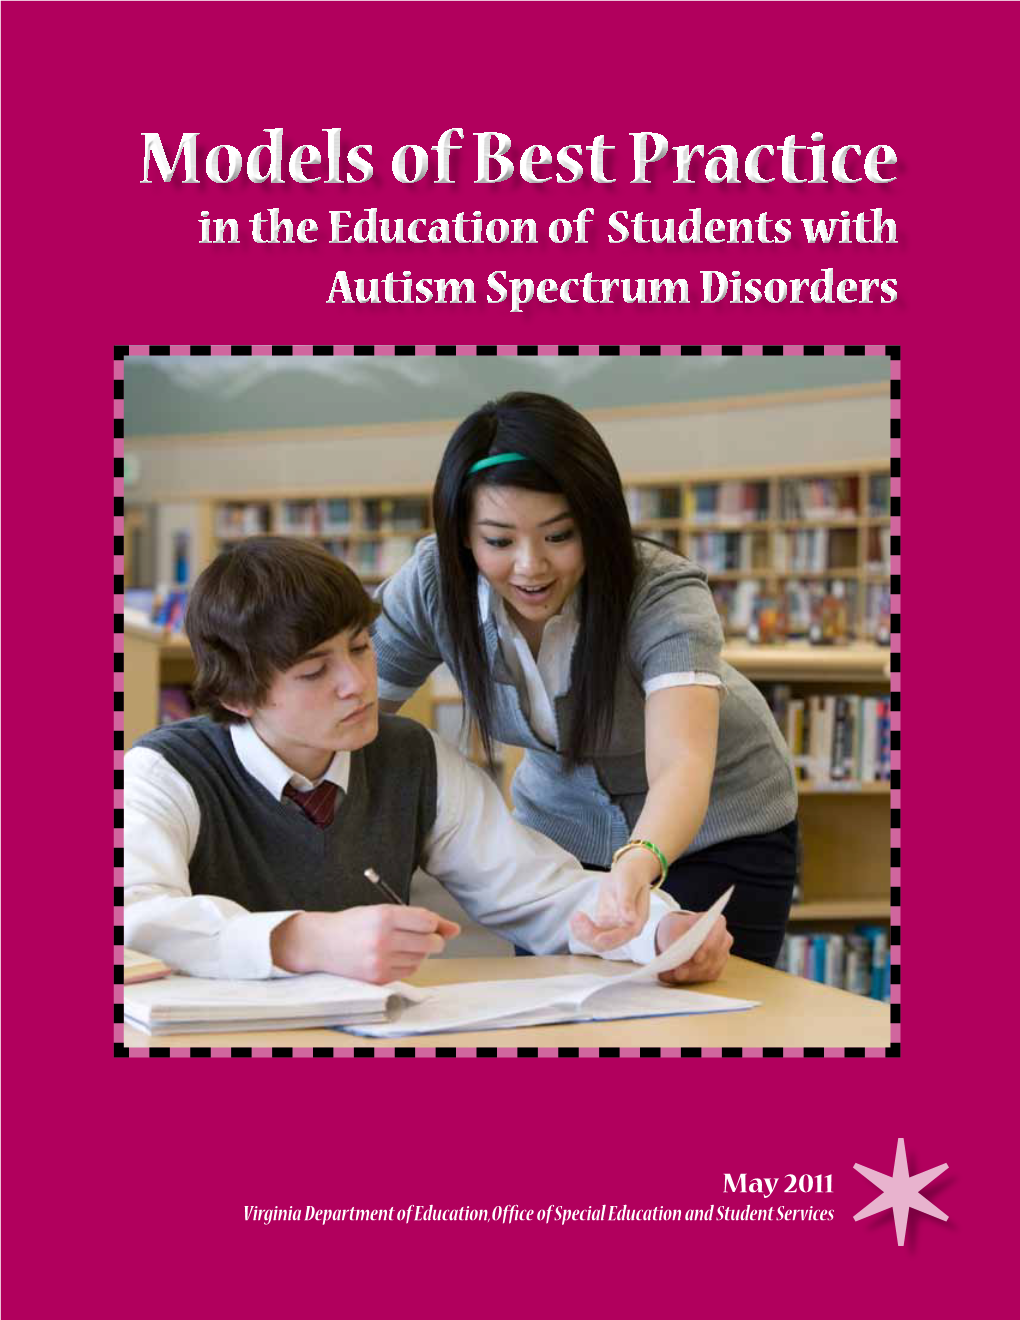 Models of Best Practice in the Education of Students with Autism Spectrum Disorders